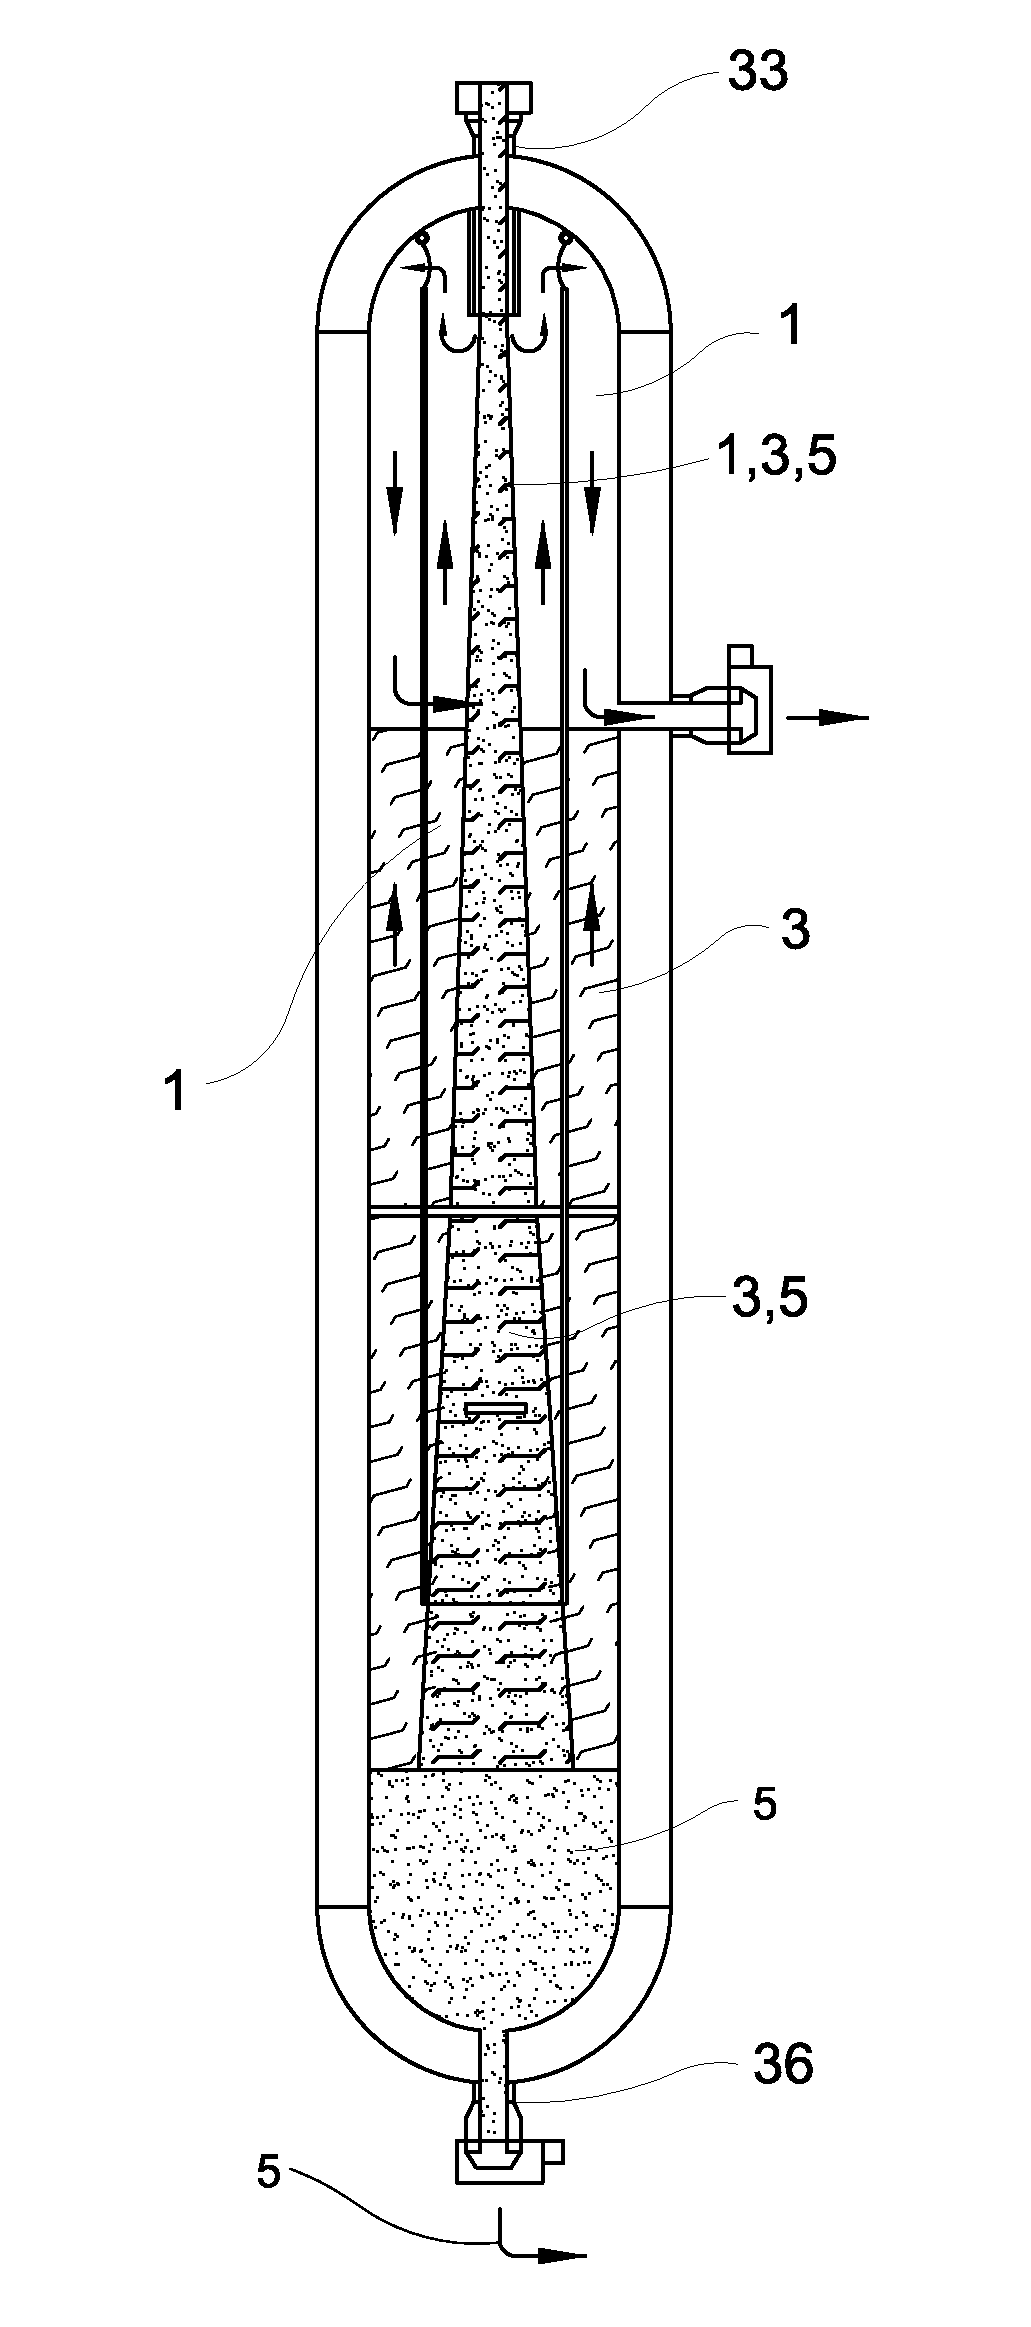 Sand separator for petroleum and natural gas wells